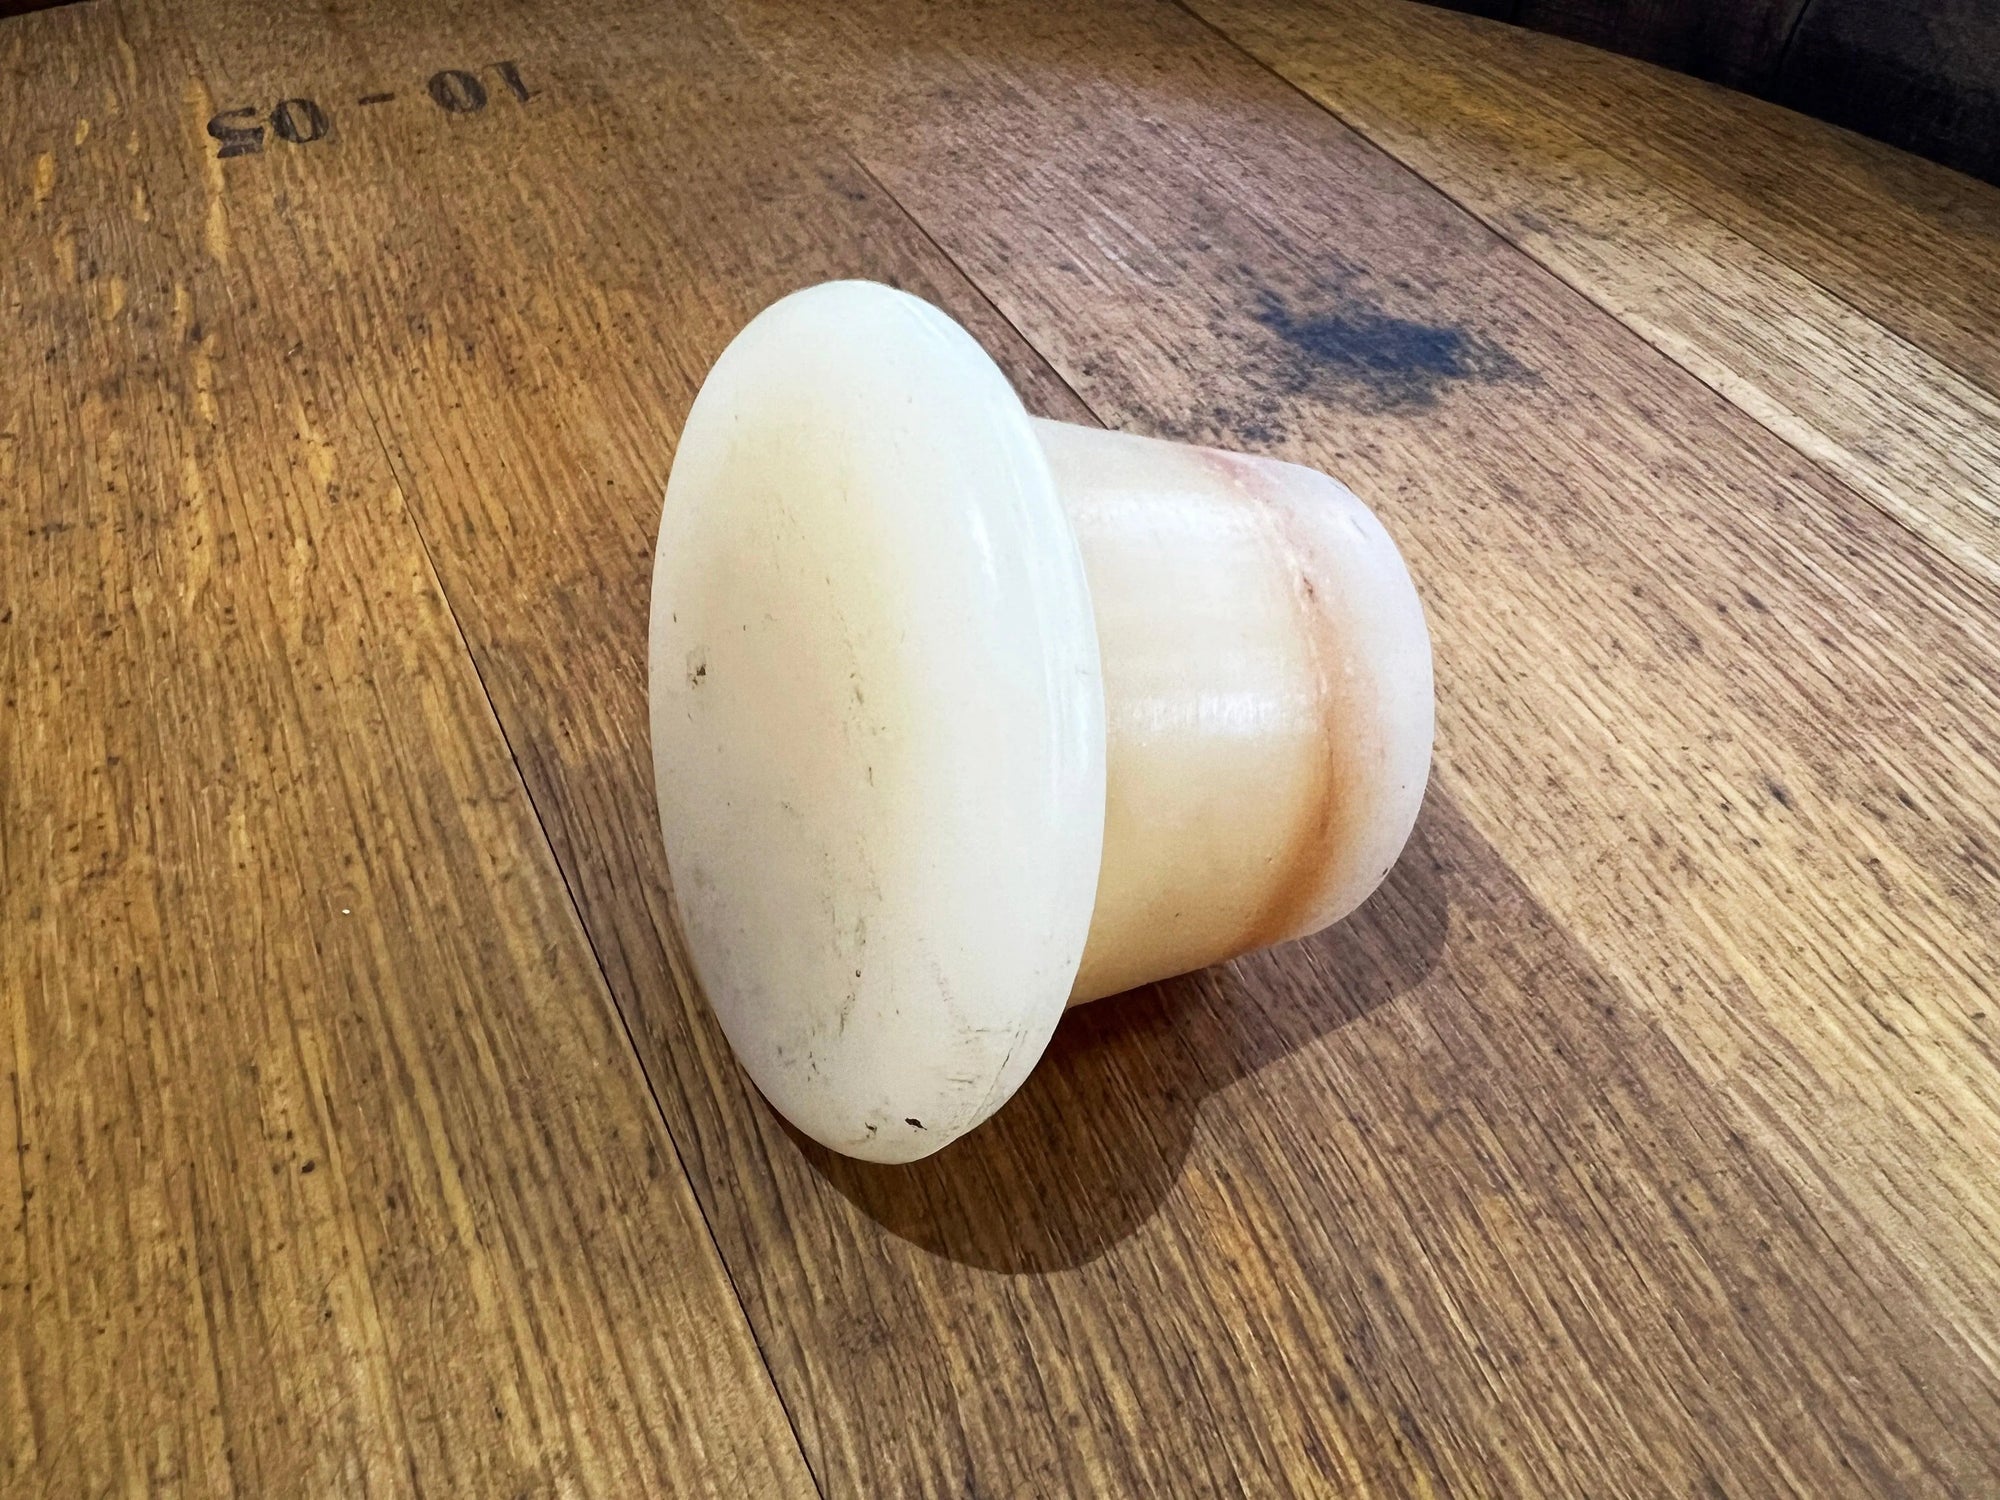 Used Silicone Wine Barrel Bungs & Stoppers - Oak Wood Wine Barrels. wine barrel coffee table barrel glass top wine barrel glass top whiskey barrel glass top bourbon barrel glass top barrel coffee table barrel wine rack wine barrel table whiskey barrel whiskey barrel table wine barrel handma